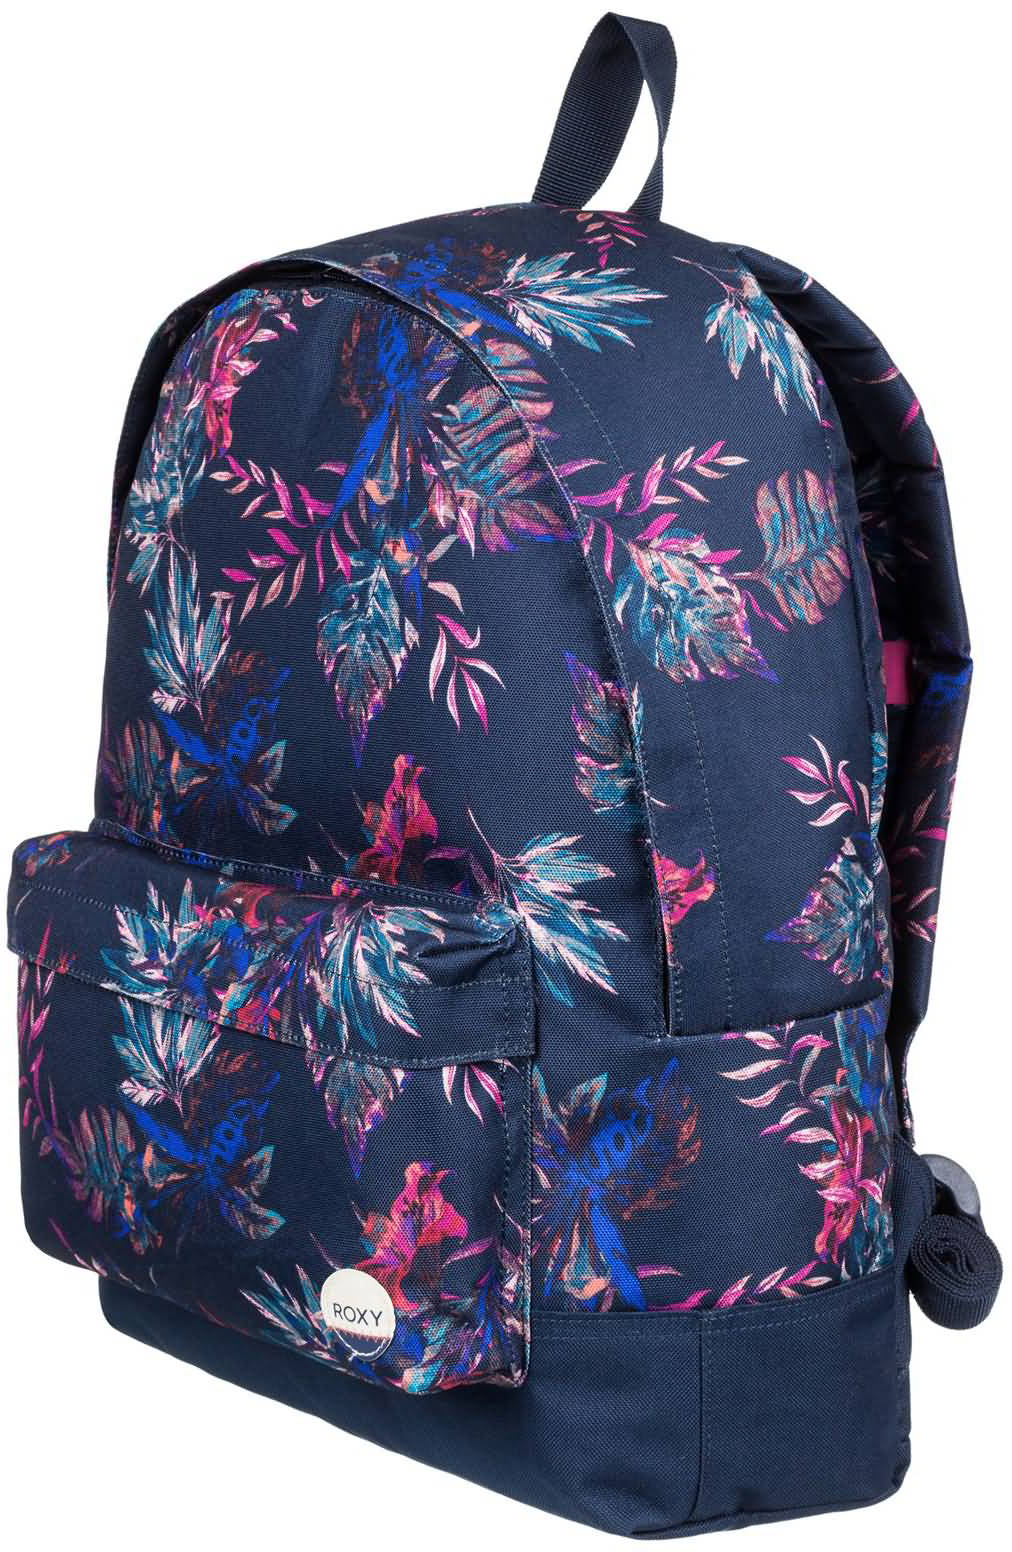 Roxy Surf Summer Women Beach Accessories Travel Bags Luggage BackPacks ...